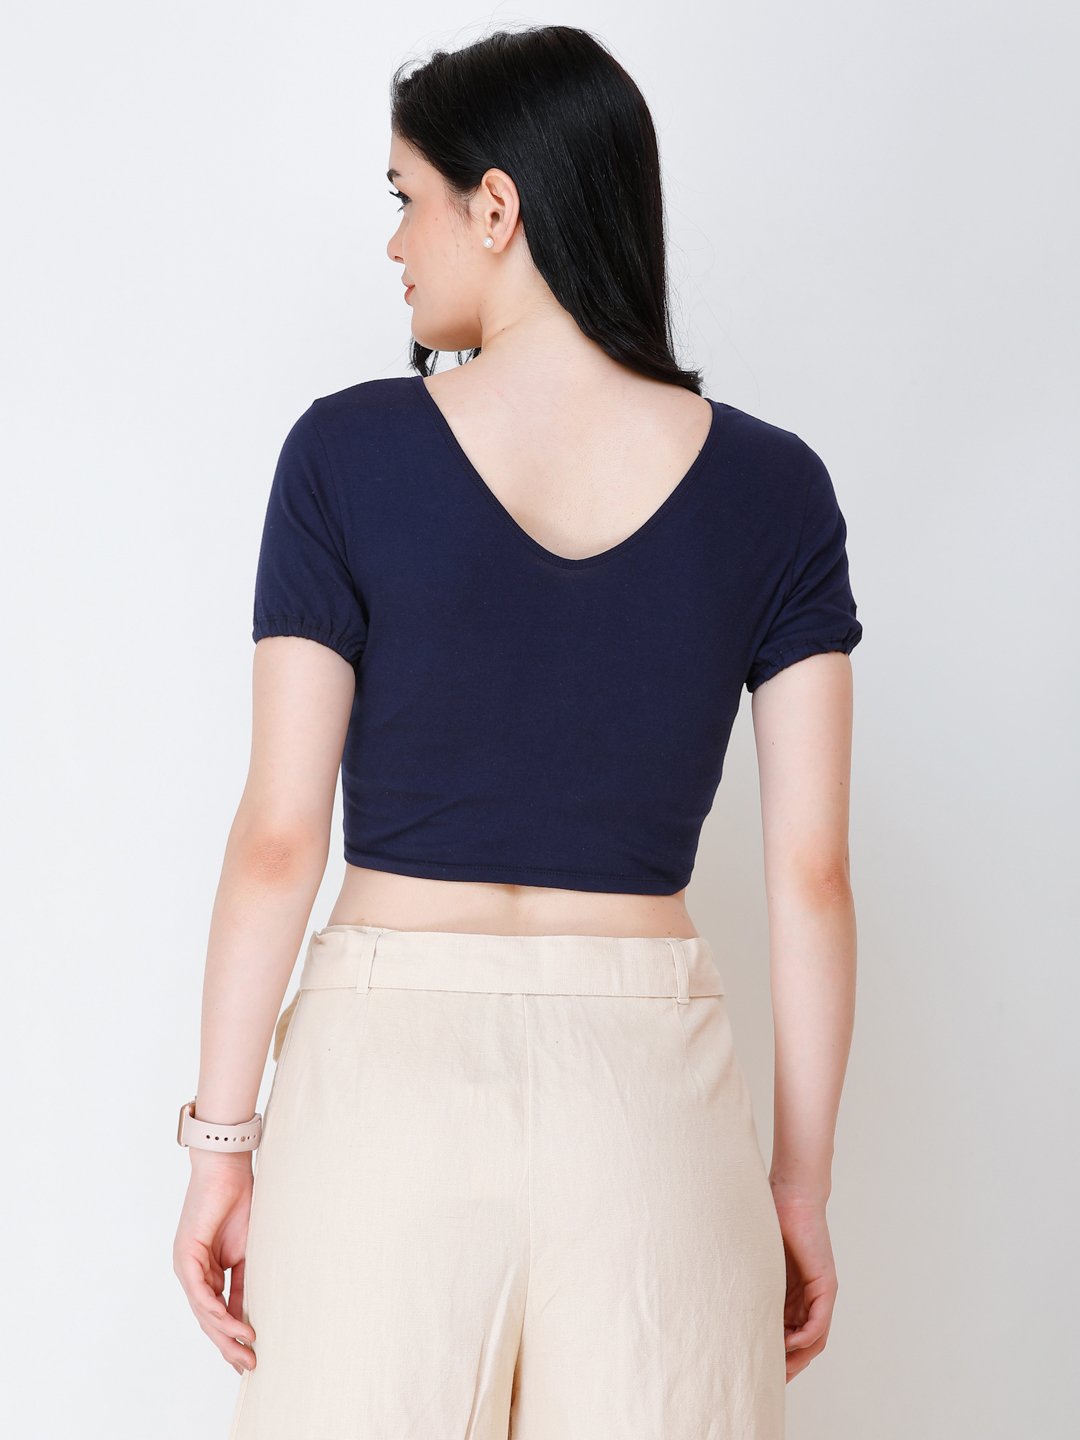 SCORPIUS Navy Blue styled front crop top